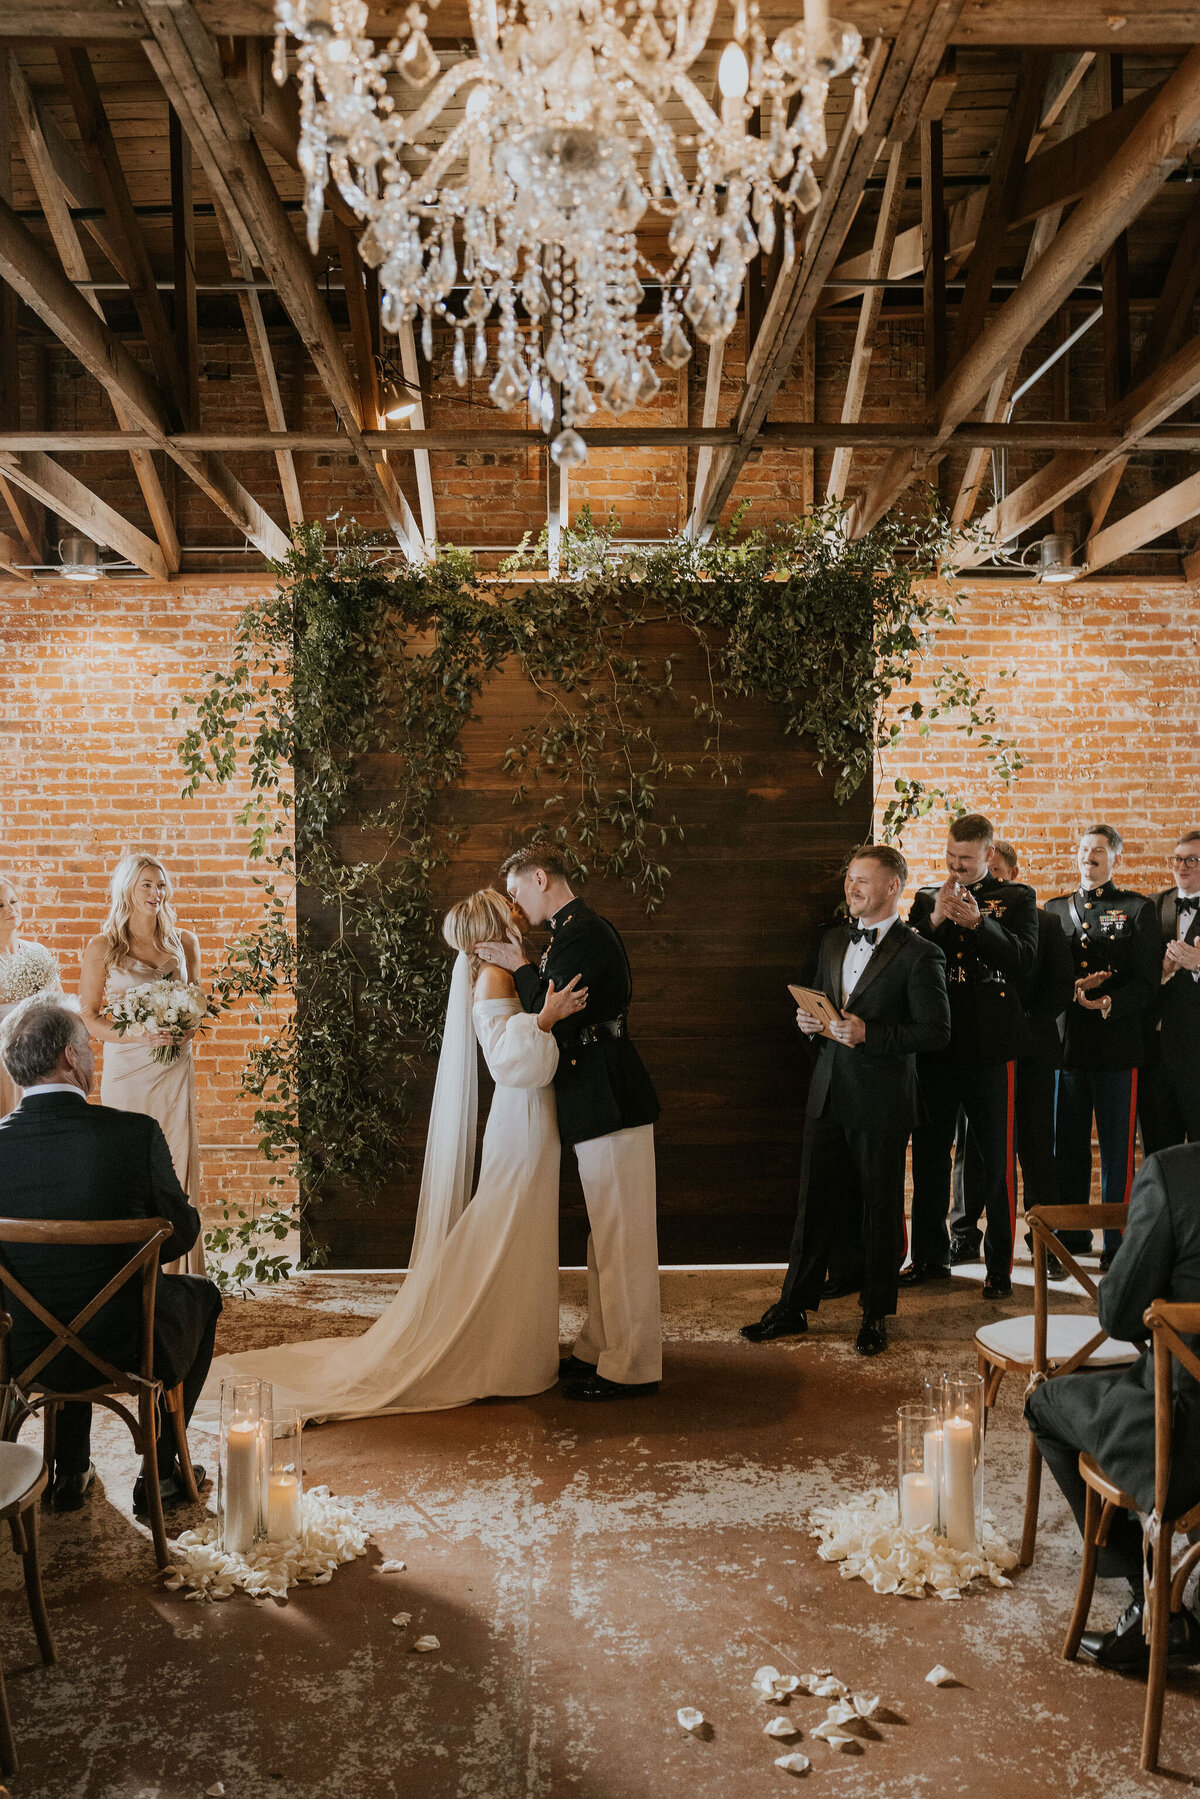 Wedding ceremony at classic greenery and white wedding at the St vrain